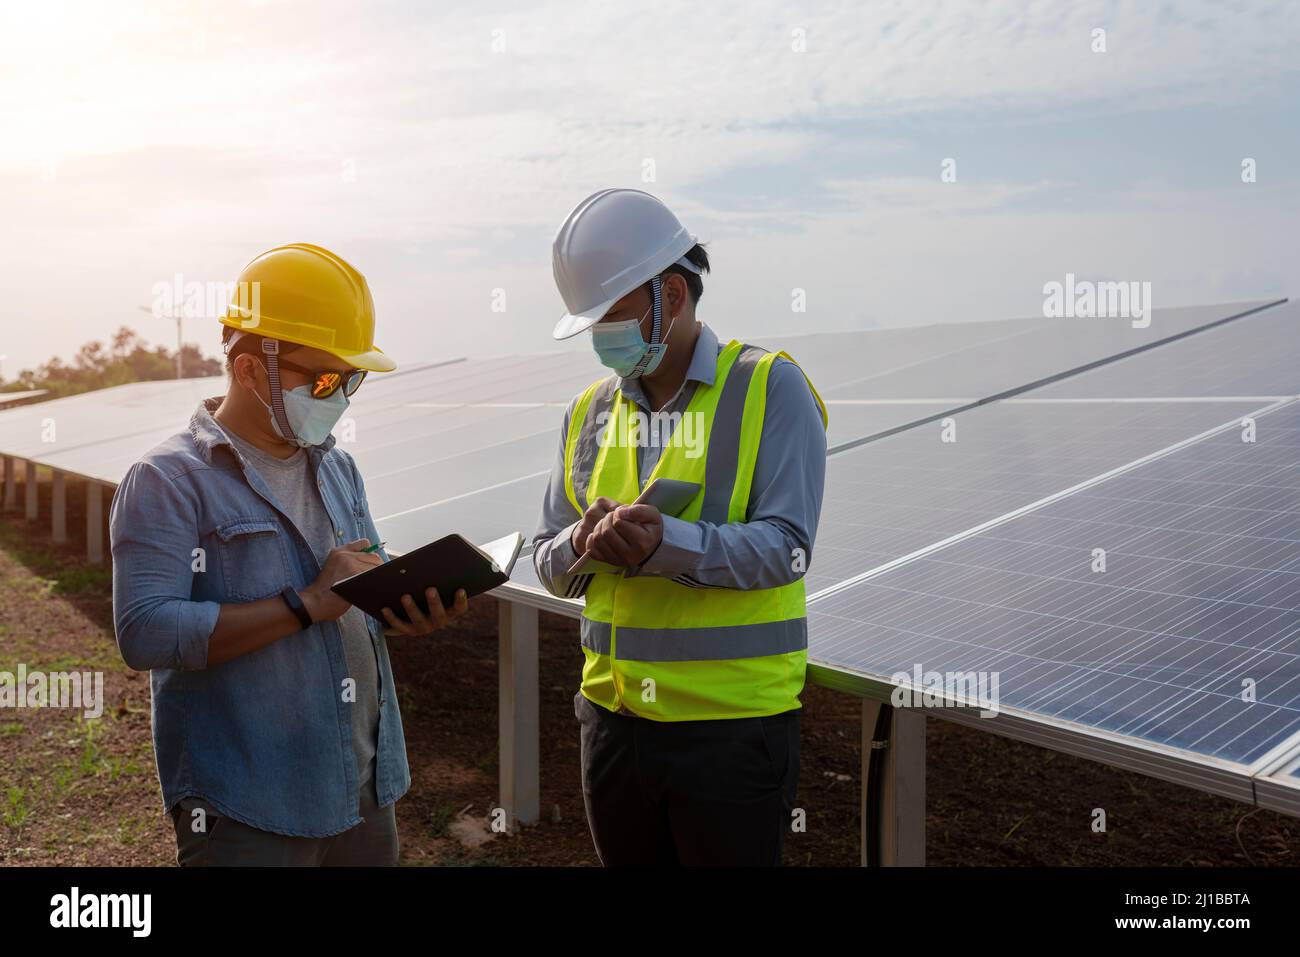 Engineers and technicians work on planning to power solar panel renewable power plants. Stock Photo